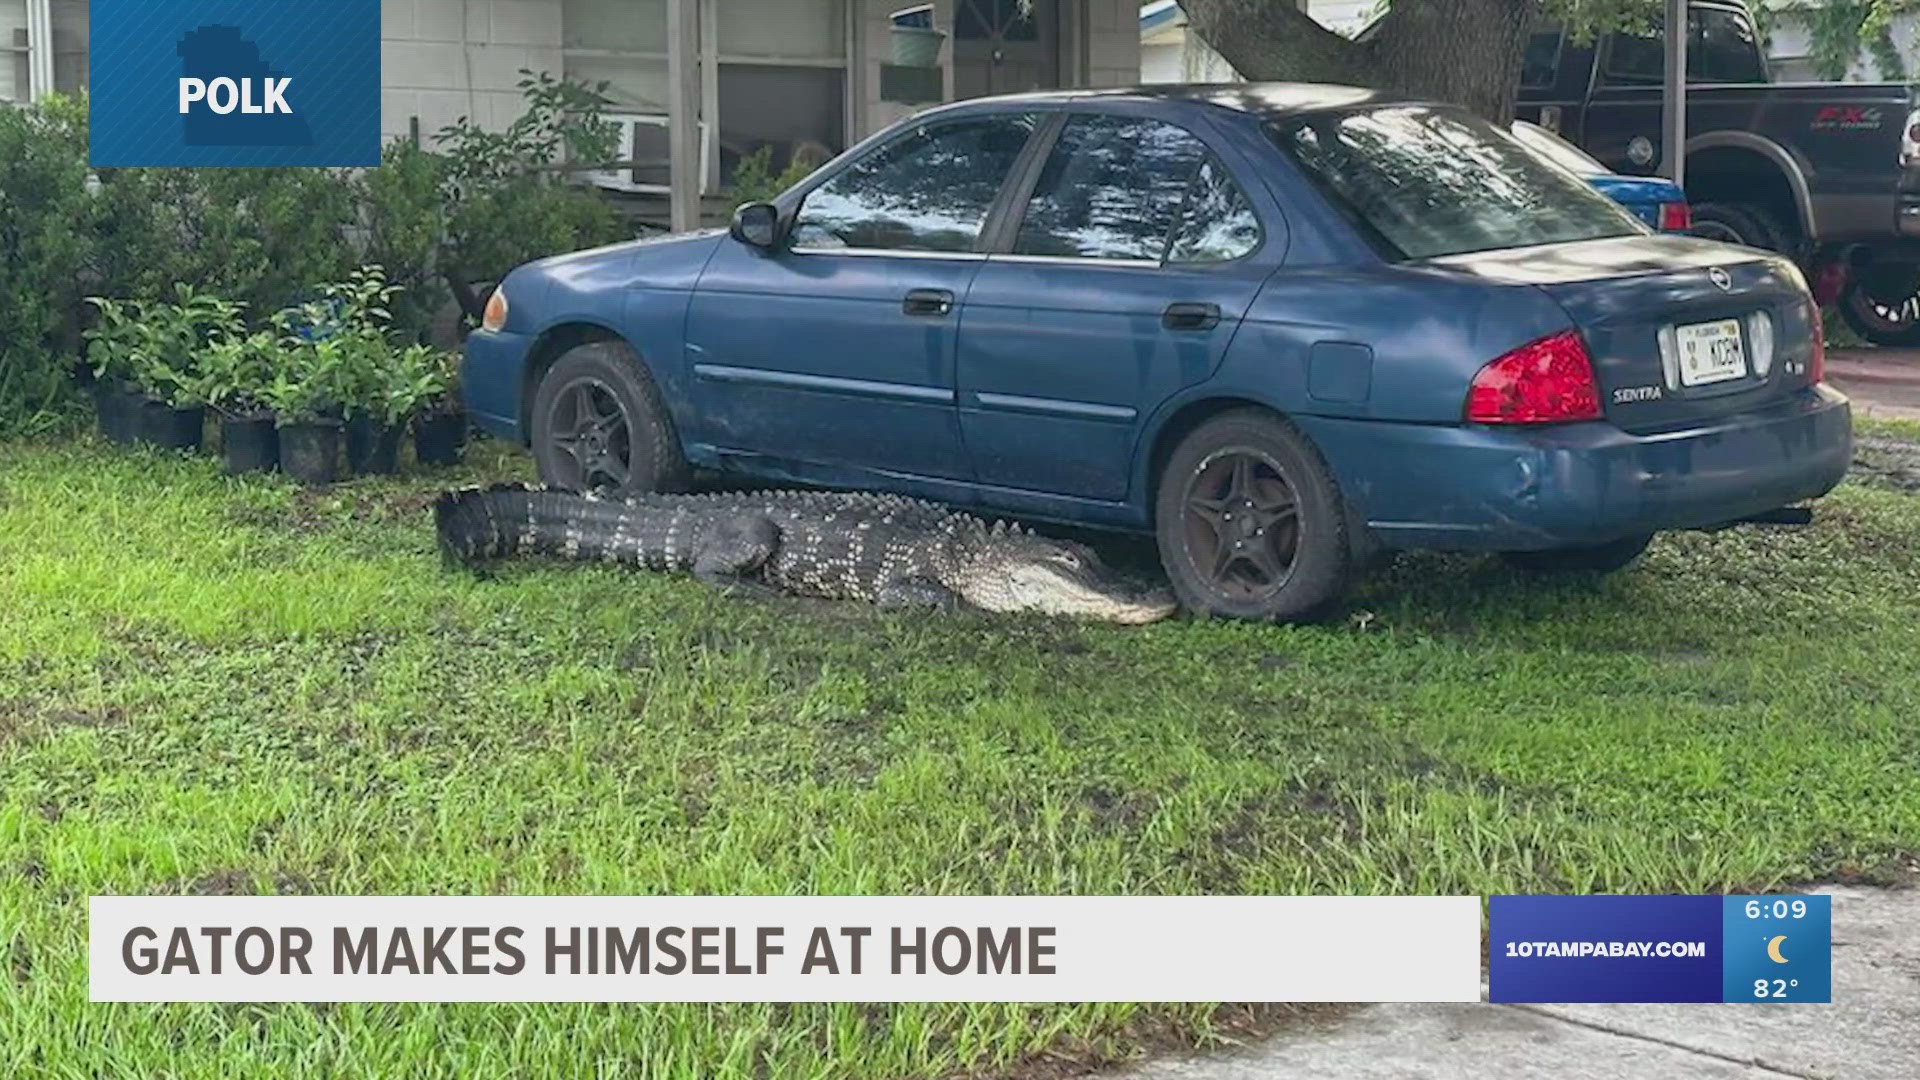 An FWC trapper was eventually able to relocate the massive alligator.